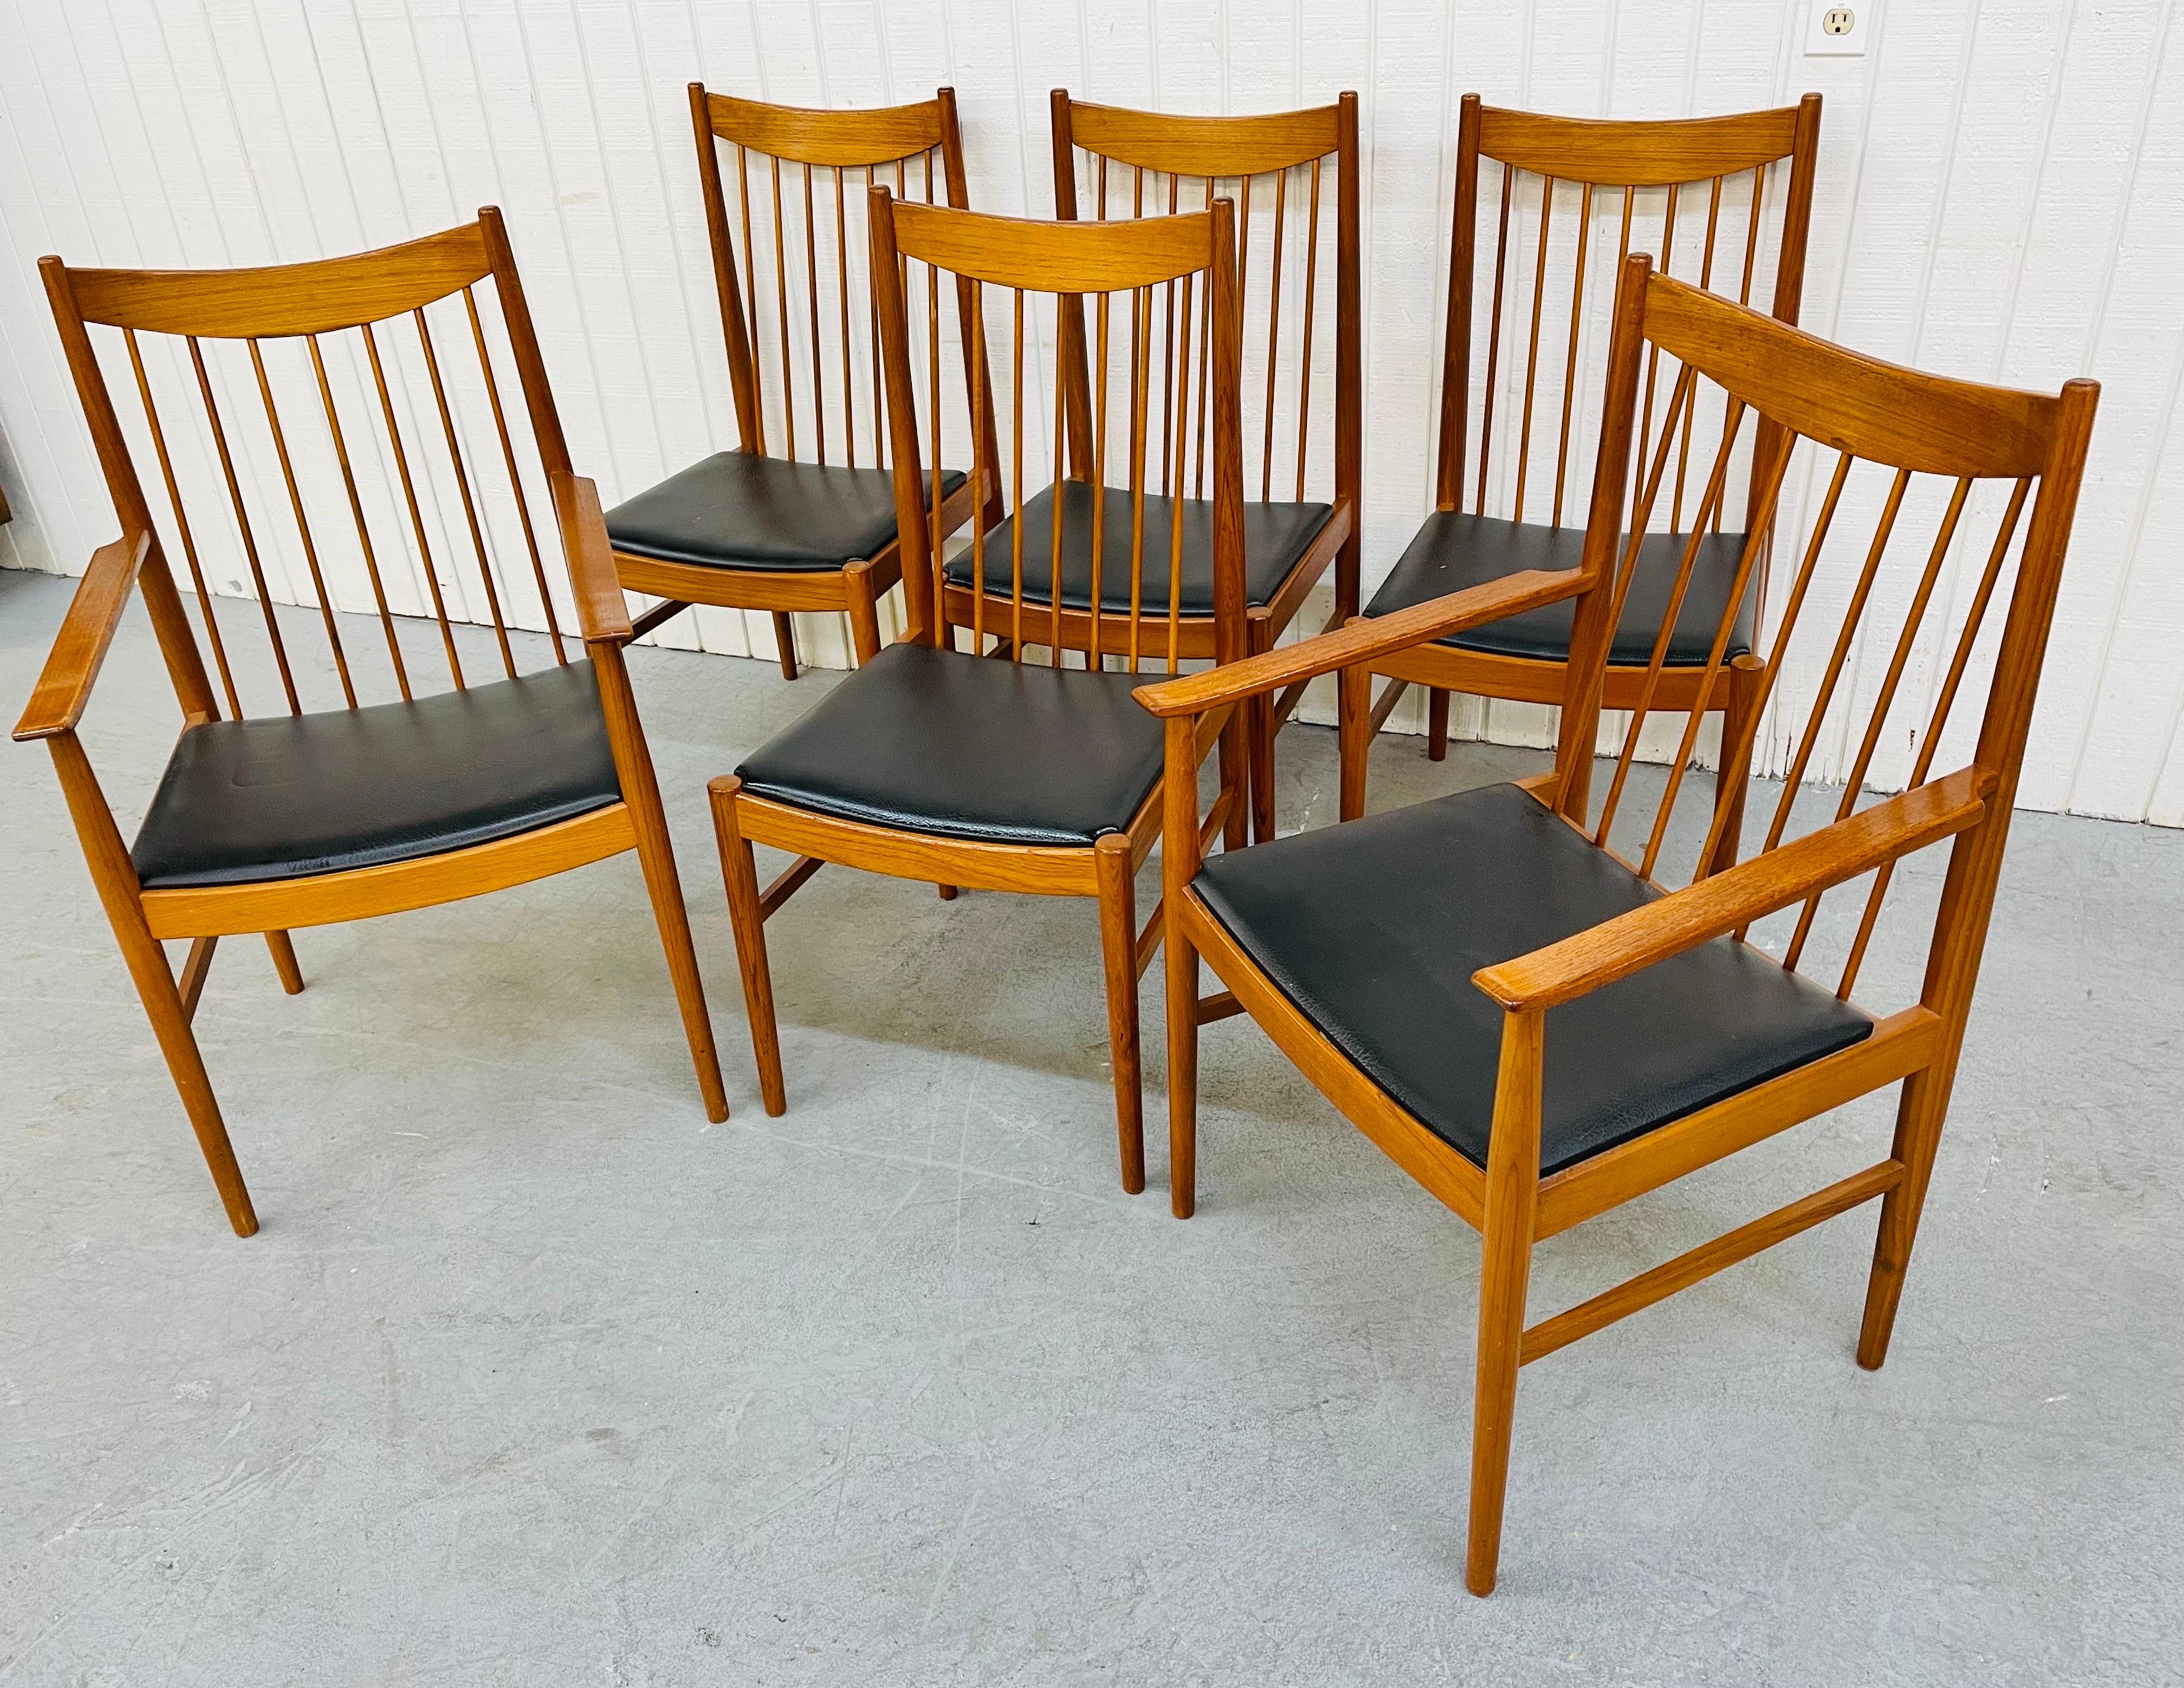 This listing is for a set of six midcentury Danish Modern teak spindle dining chairs. Featuring four straight chairs, two arm chairs, spindle backs, original black vinyl upholstery, curved back rest tops, and a beautiful teak finish.